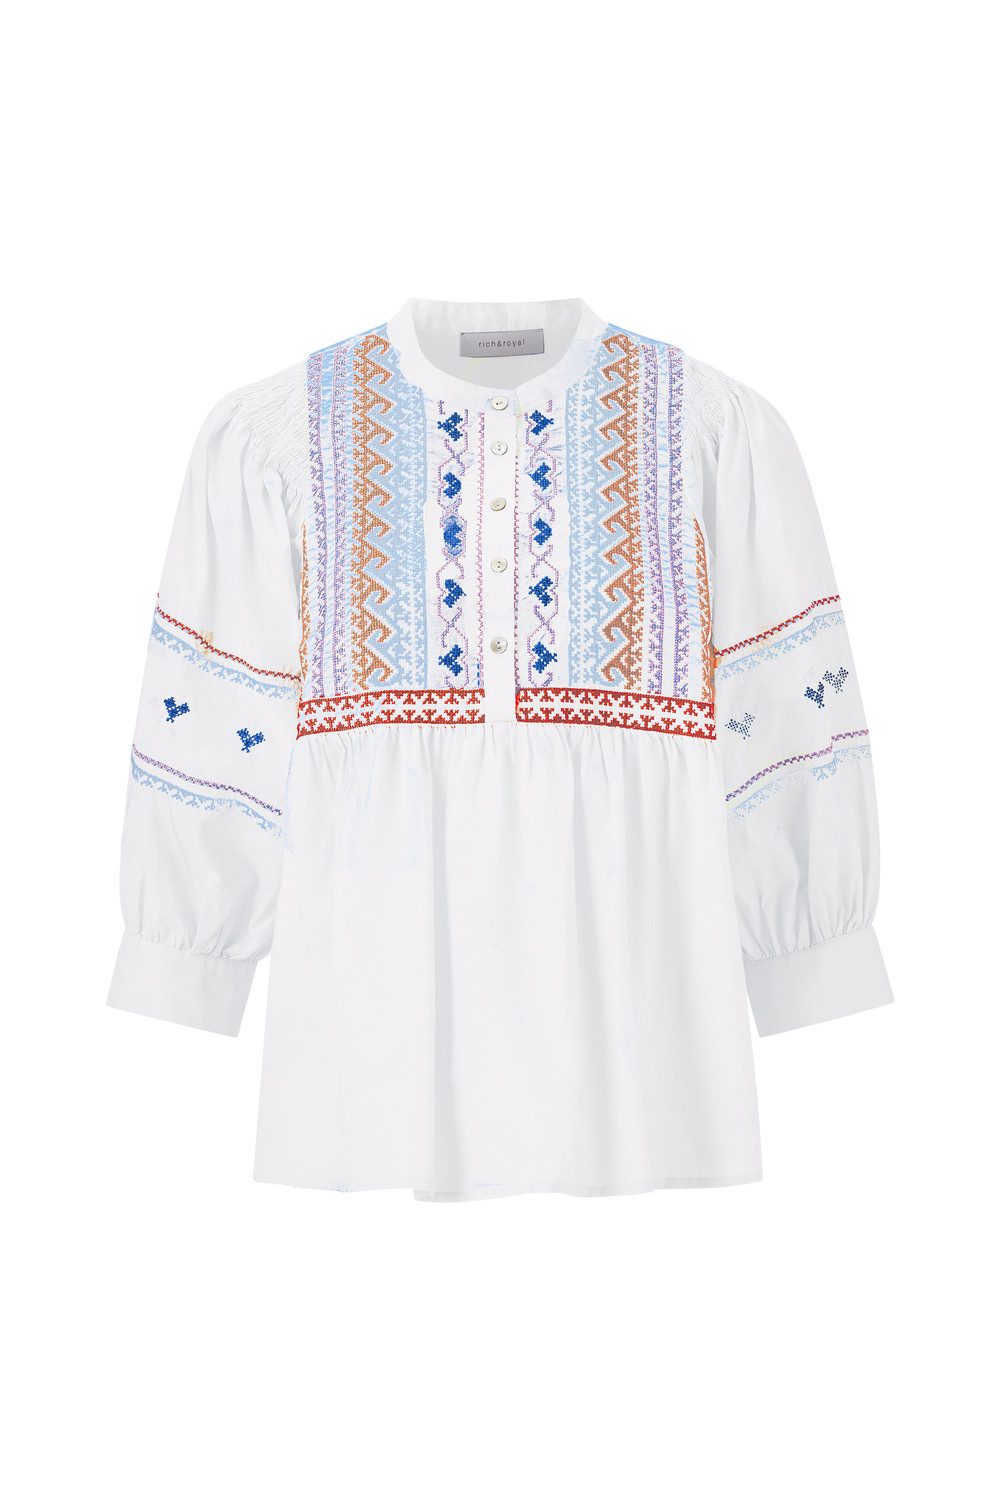 Rich & Royal Blusenshirt blouse with embroidery organic, white